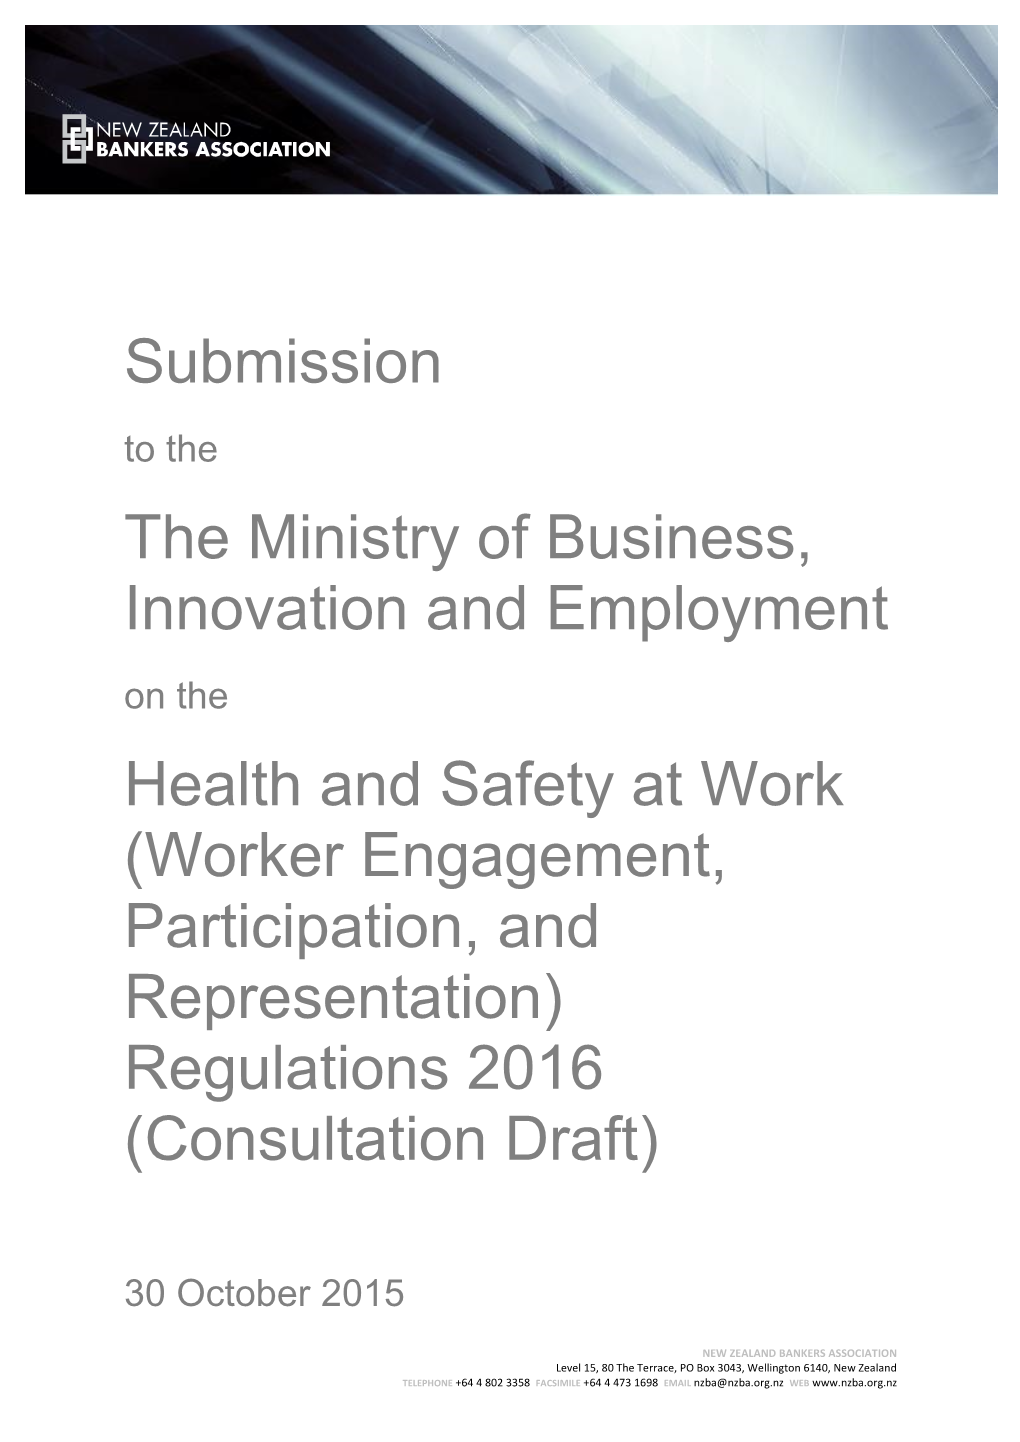 Health and Safety at Work (Worker Engagement, Participation, and Representation) Regulations 2016 (Consultation Draft)